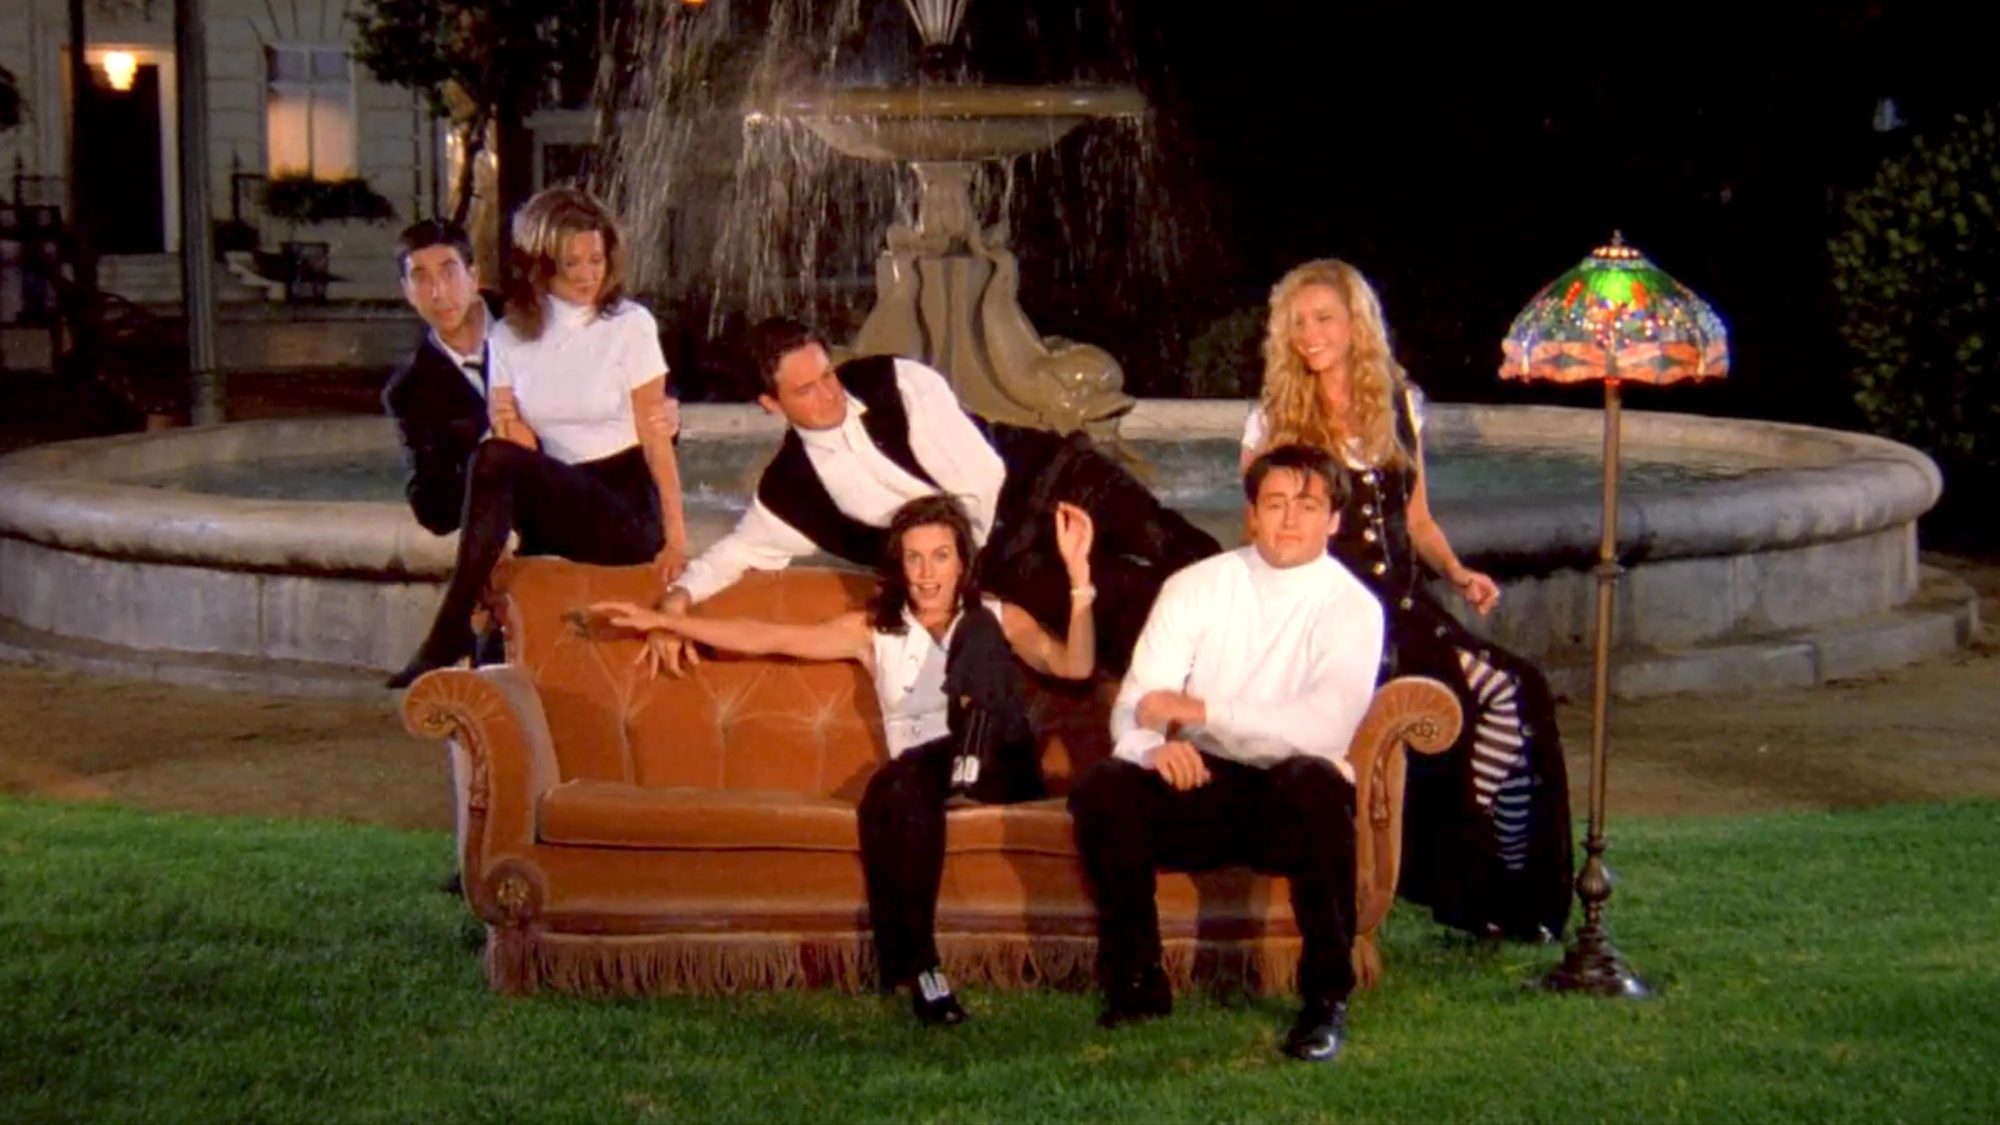 Friends Opening Credits